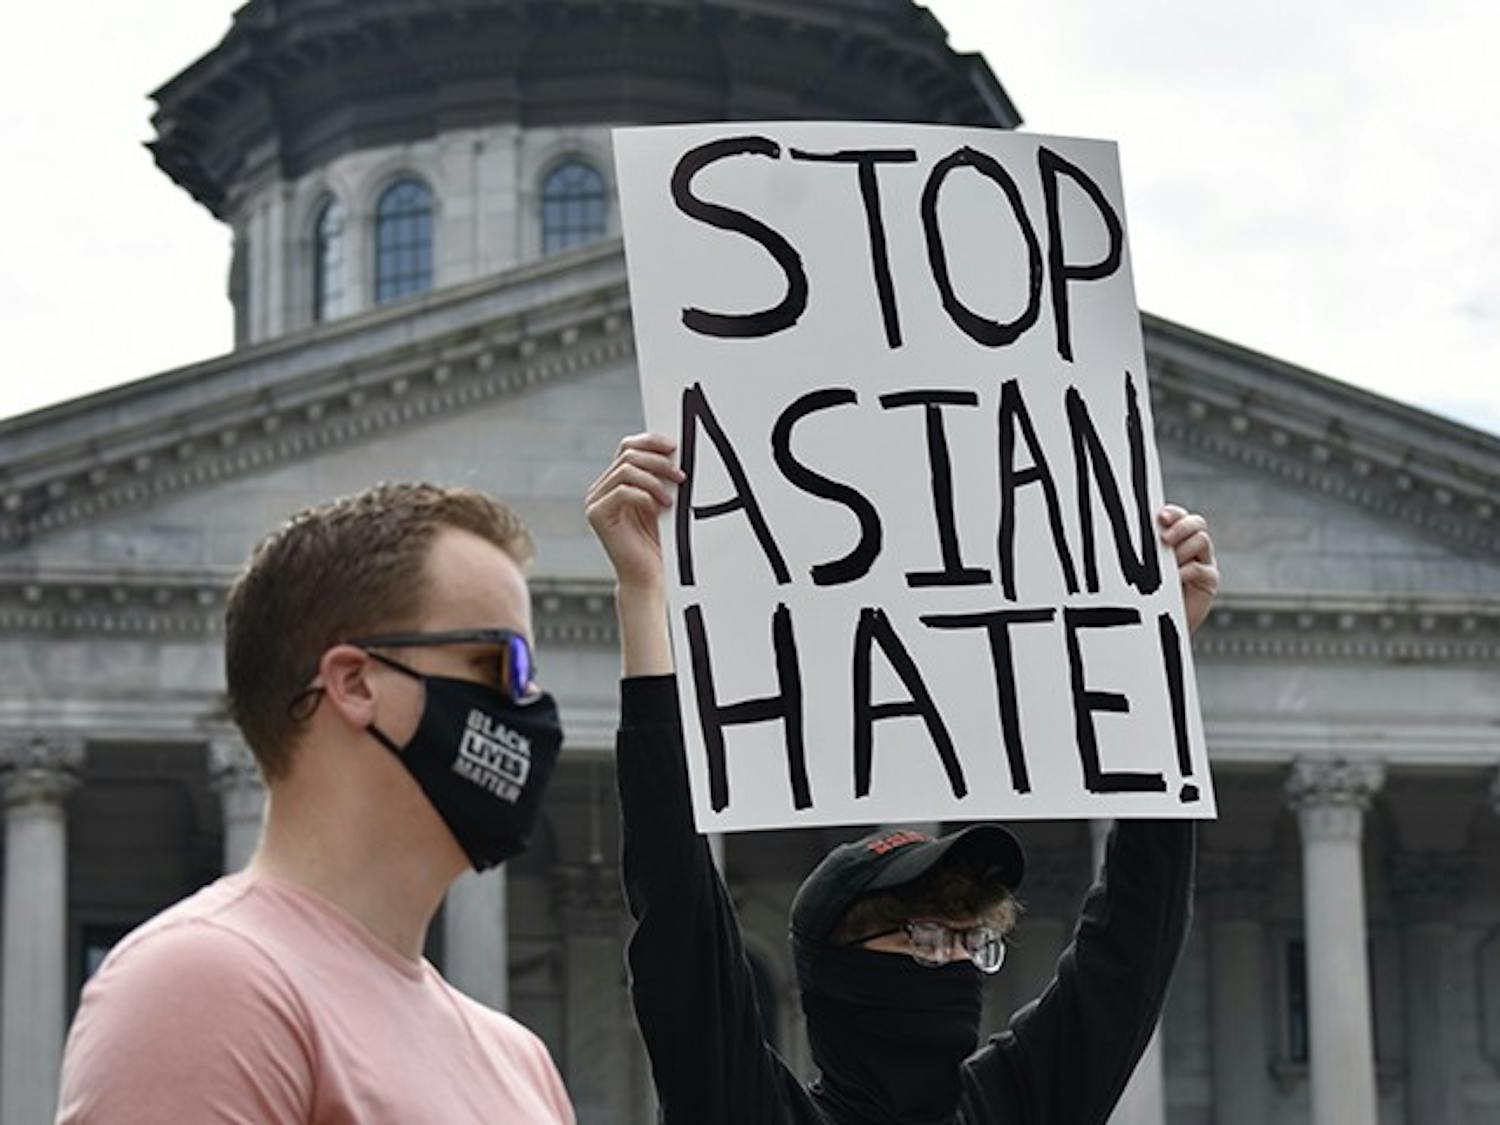 A protestor displays a sign that reads “STOP ASIAN HATE” in front of the State House on March 7, 2021.